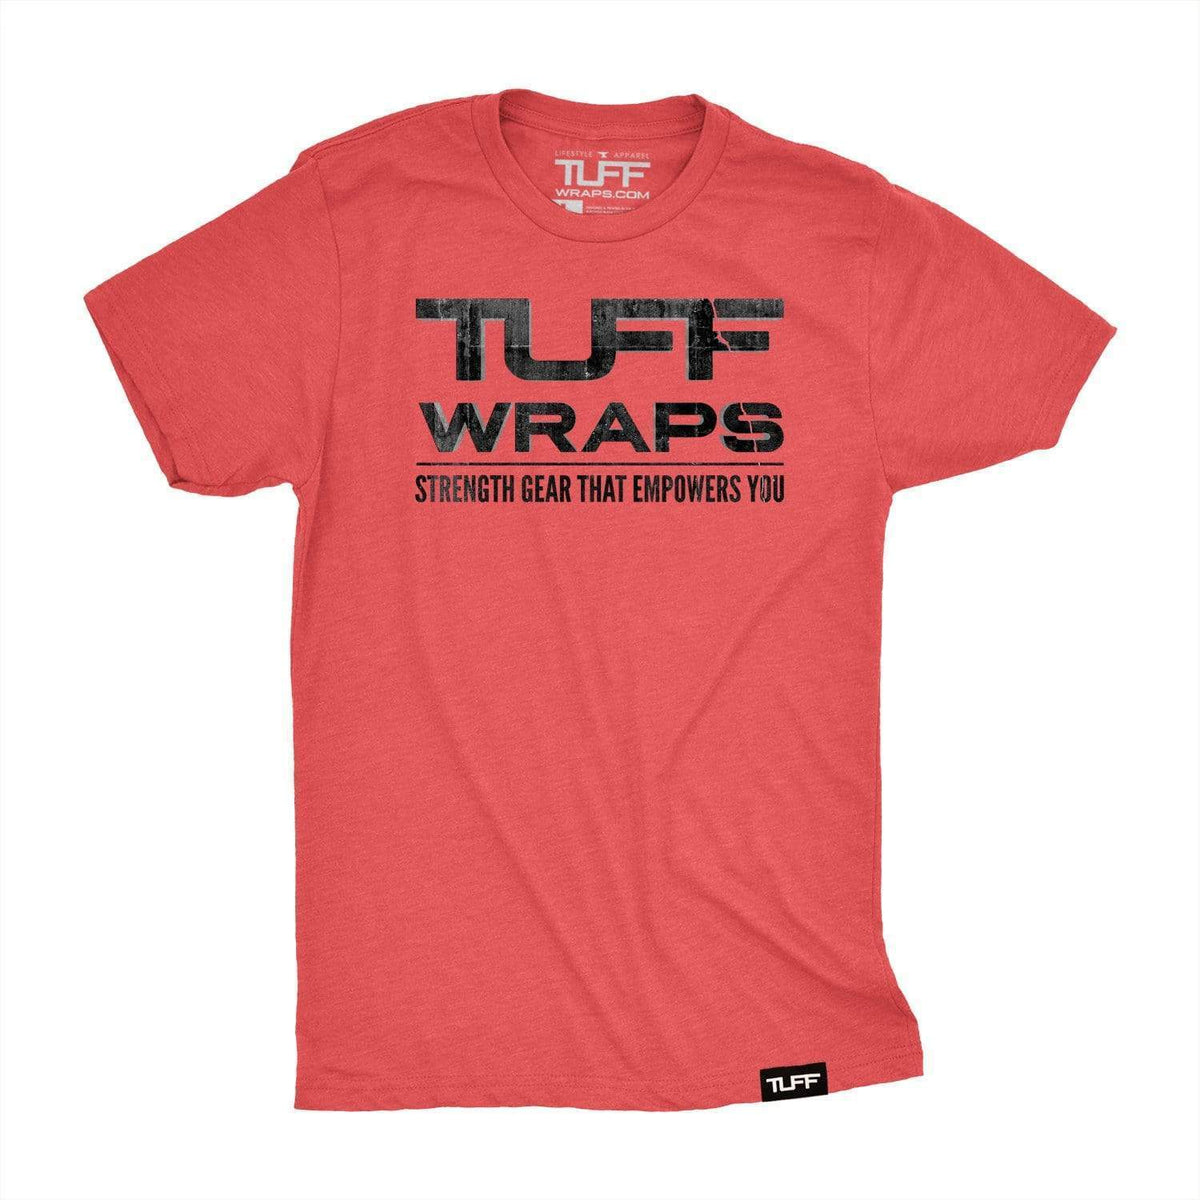 TuffWraps Strength Gear That Empowers Me Tee T-shirt